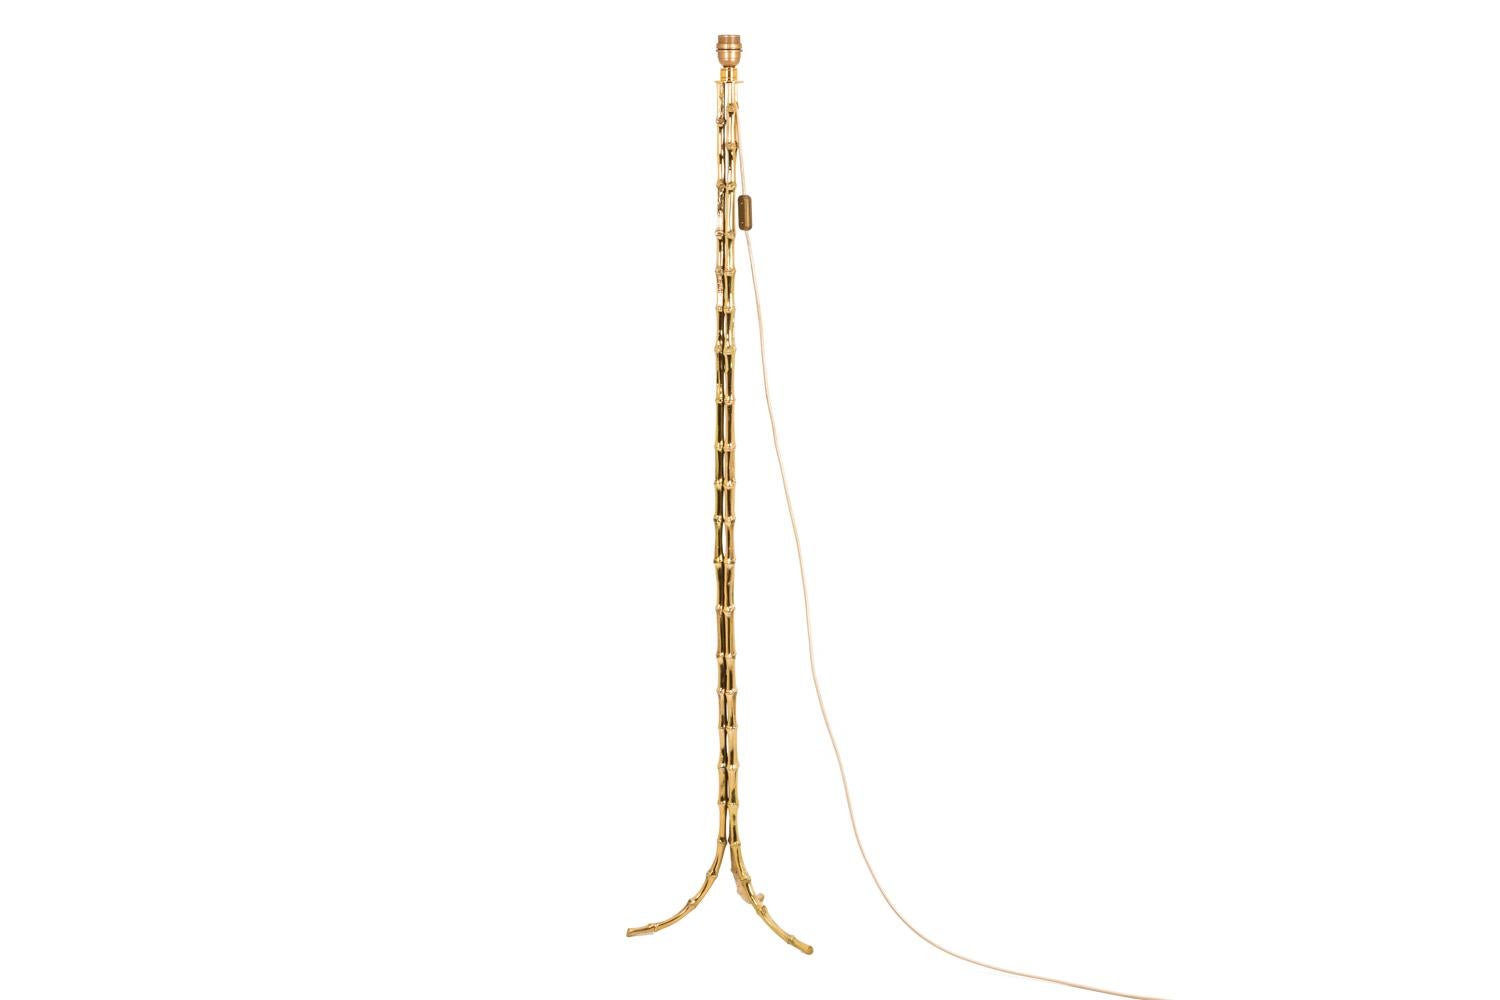 Maison Baguès, edited by. 

Tripod floor lamp in gilt bronze, standing on three curved feet. Shaft made up of three stems imitating bamboo.

Work realized in the 1970s.

Baguès is a lighting manufacturer founded in 1840 by Noël Baguès, which